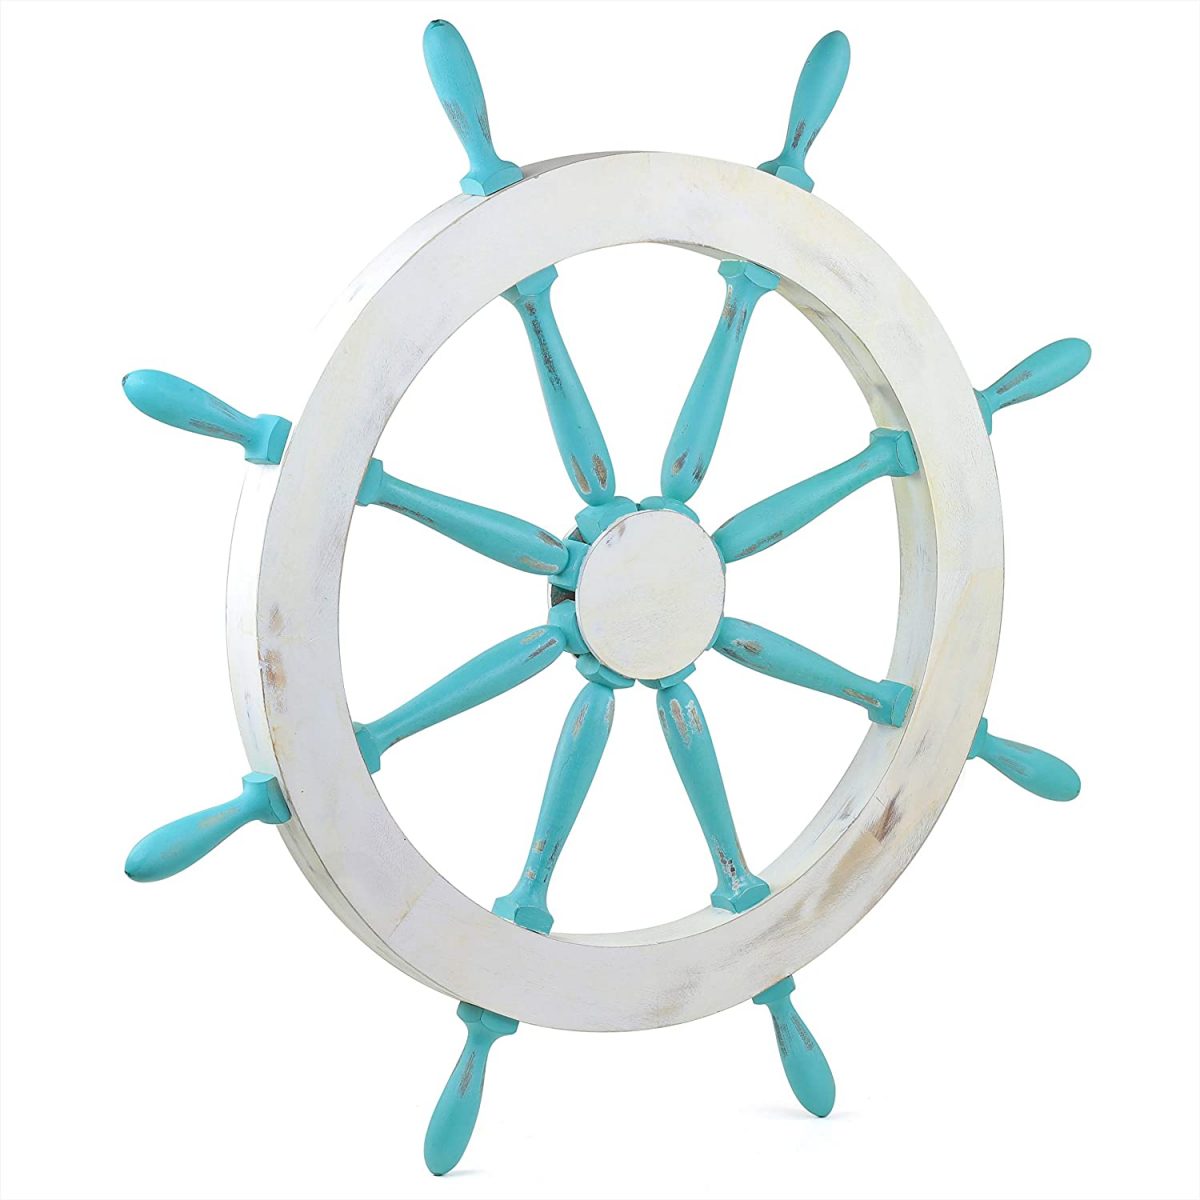 Antique Vintage Nautical Ship Wheels | Teal Blue & White Old Western Cart Wagon Carriage Wheel Style Home Decor | Pirate's Boat Steering Wheel | Wall Hanging Decor Ideas (Riviera)